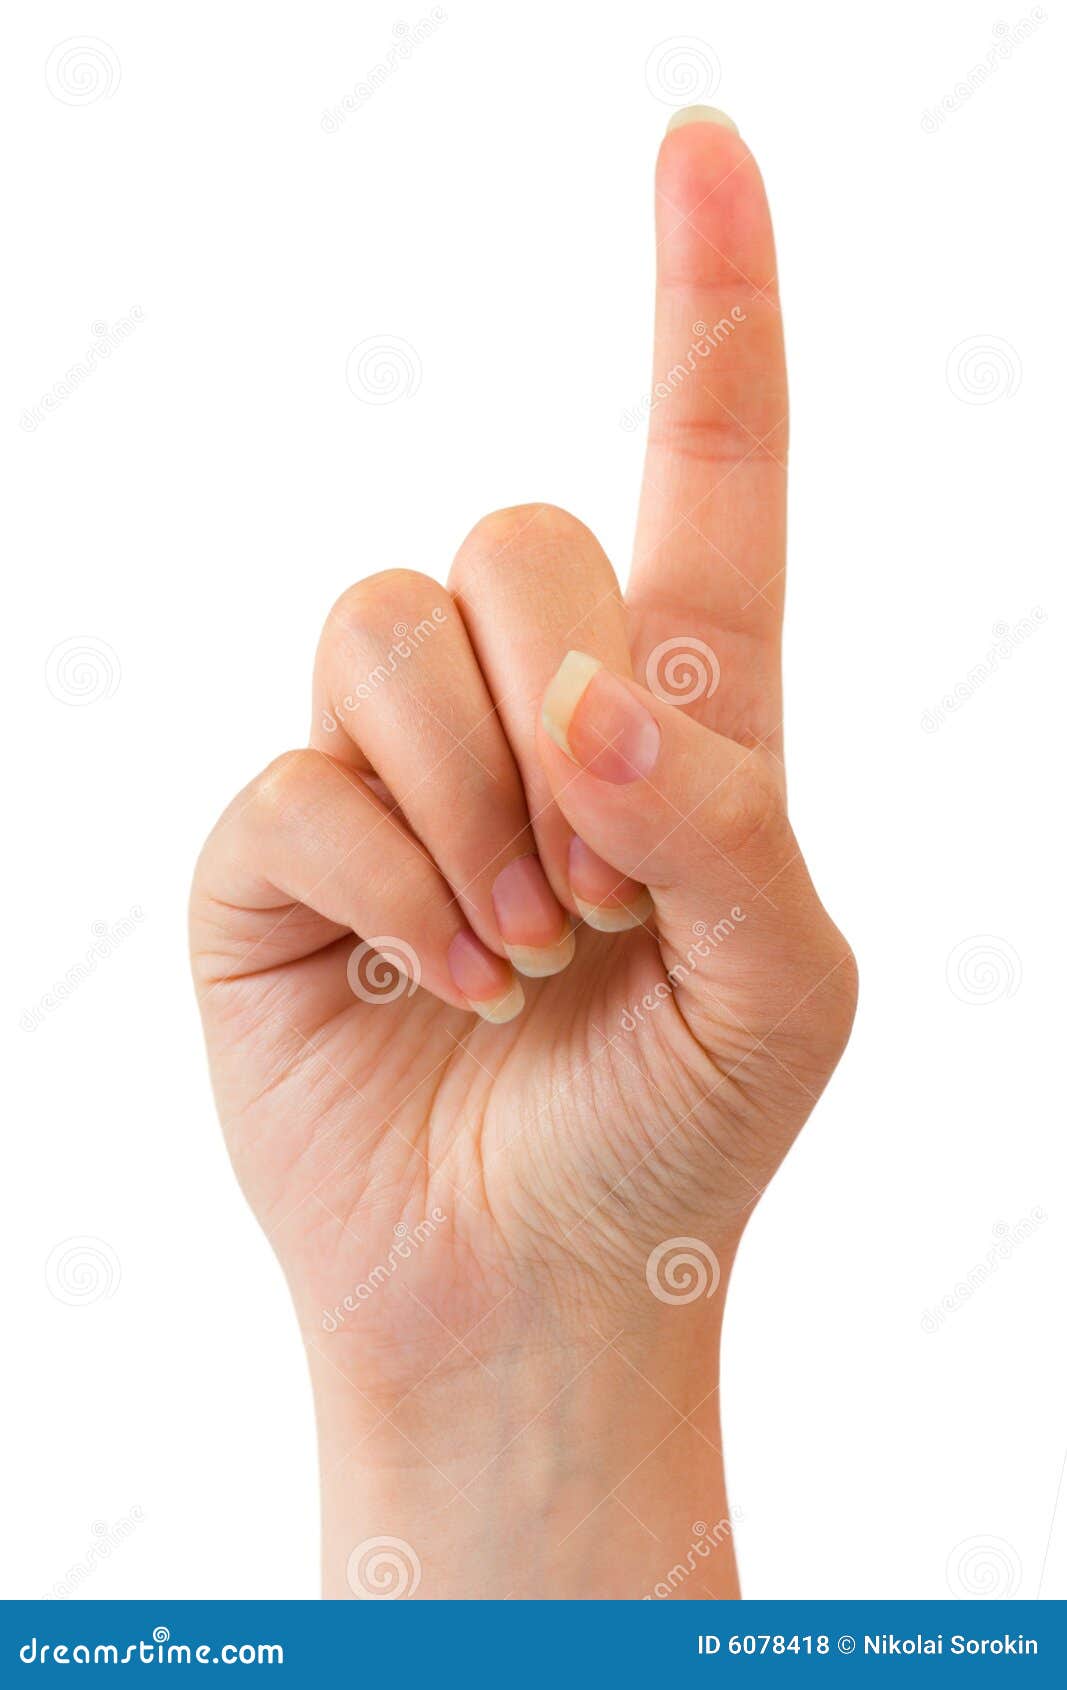 Index Finger Touching Lock Icon In Cloud Button Stock Photography